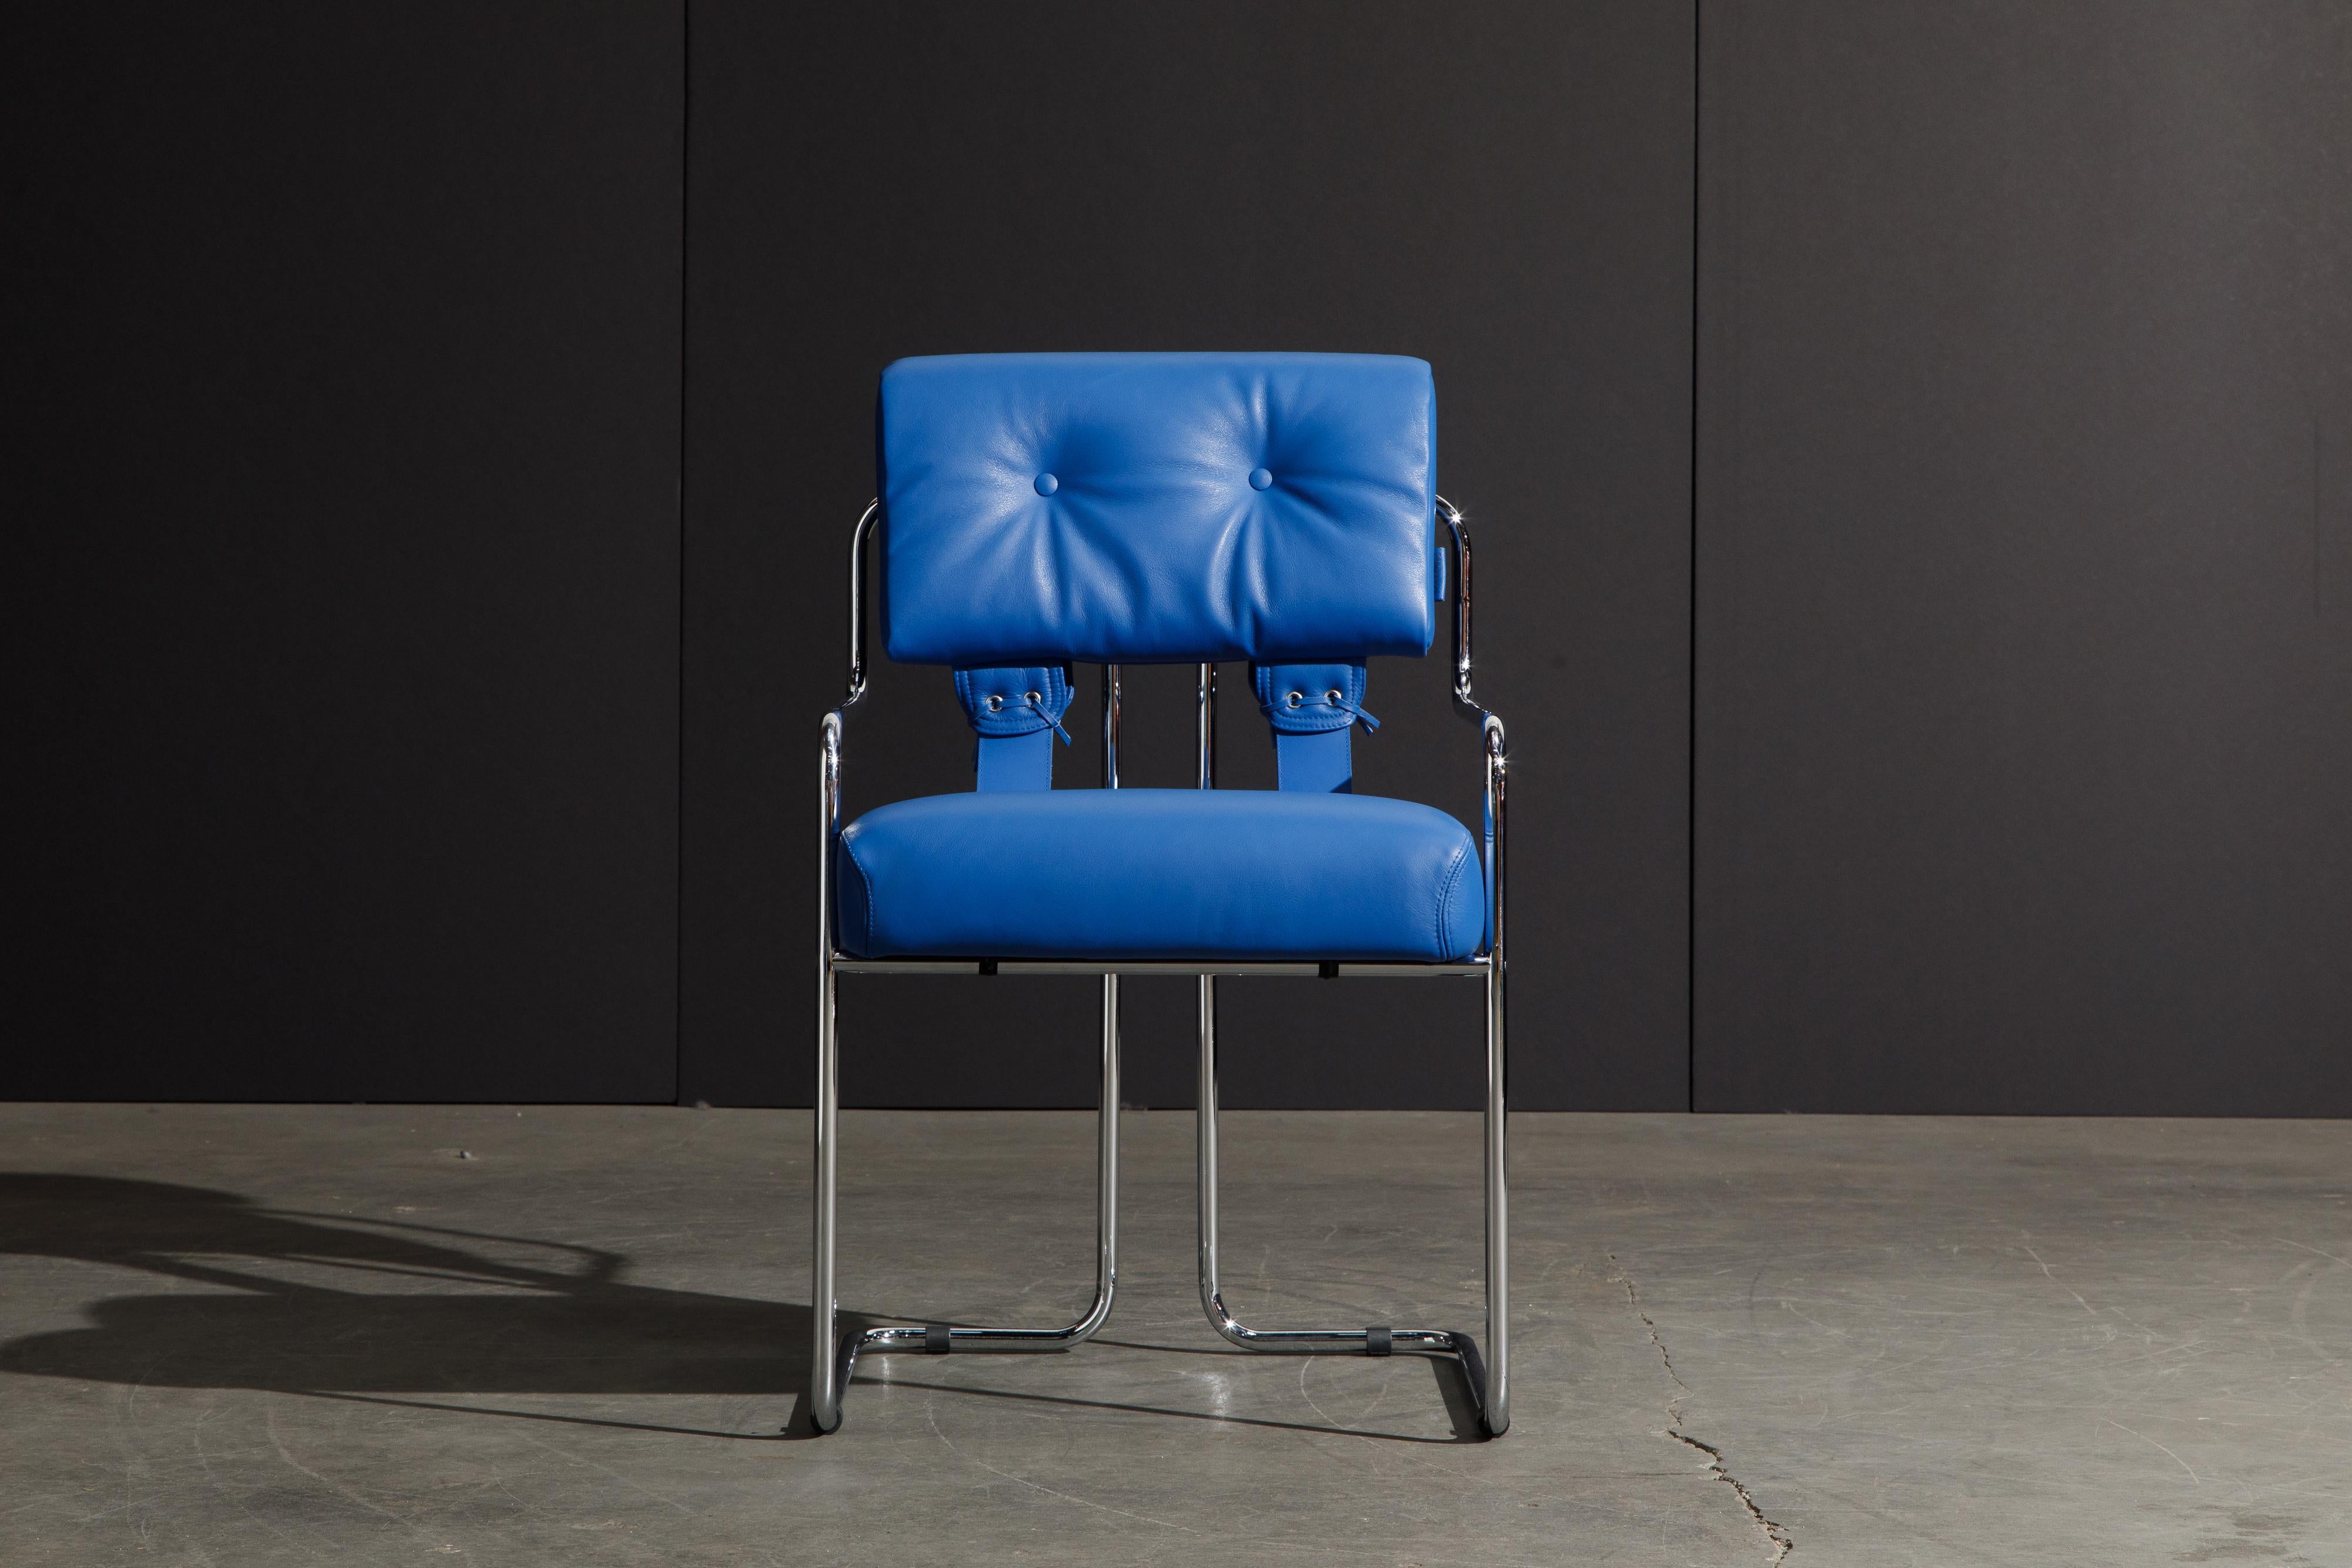 Currently, the most coveted dining chairs by interior designers are 'Tucroma' chairs by Guido Faleschini for i4 Mariani, and we have this incredible set of four (4) Tucroma armchairs in a vibrant electric blue leather with polished chrome frames.